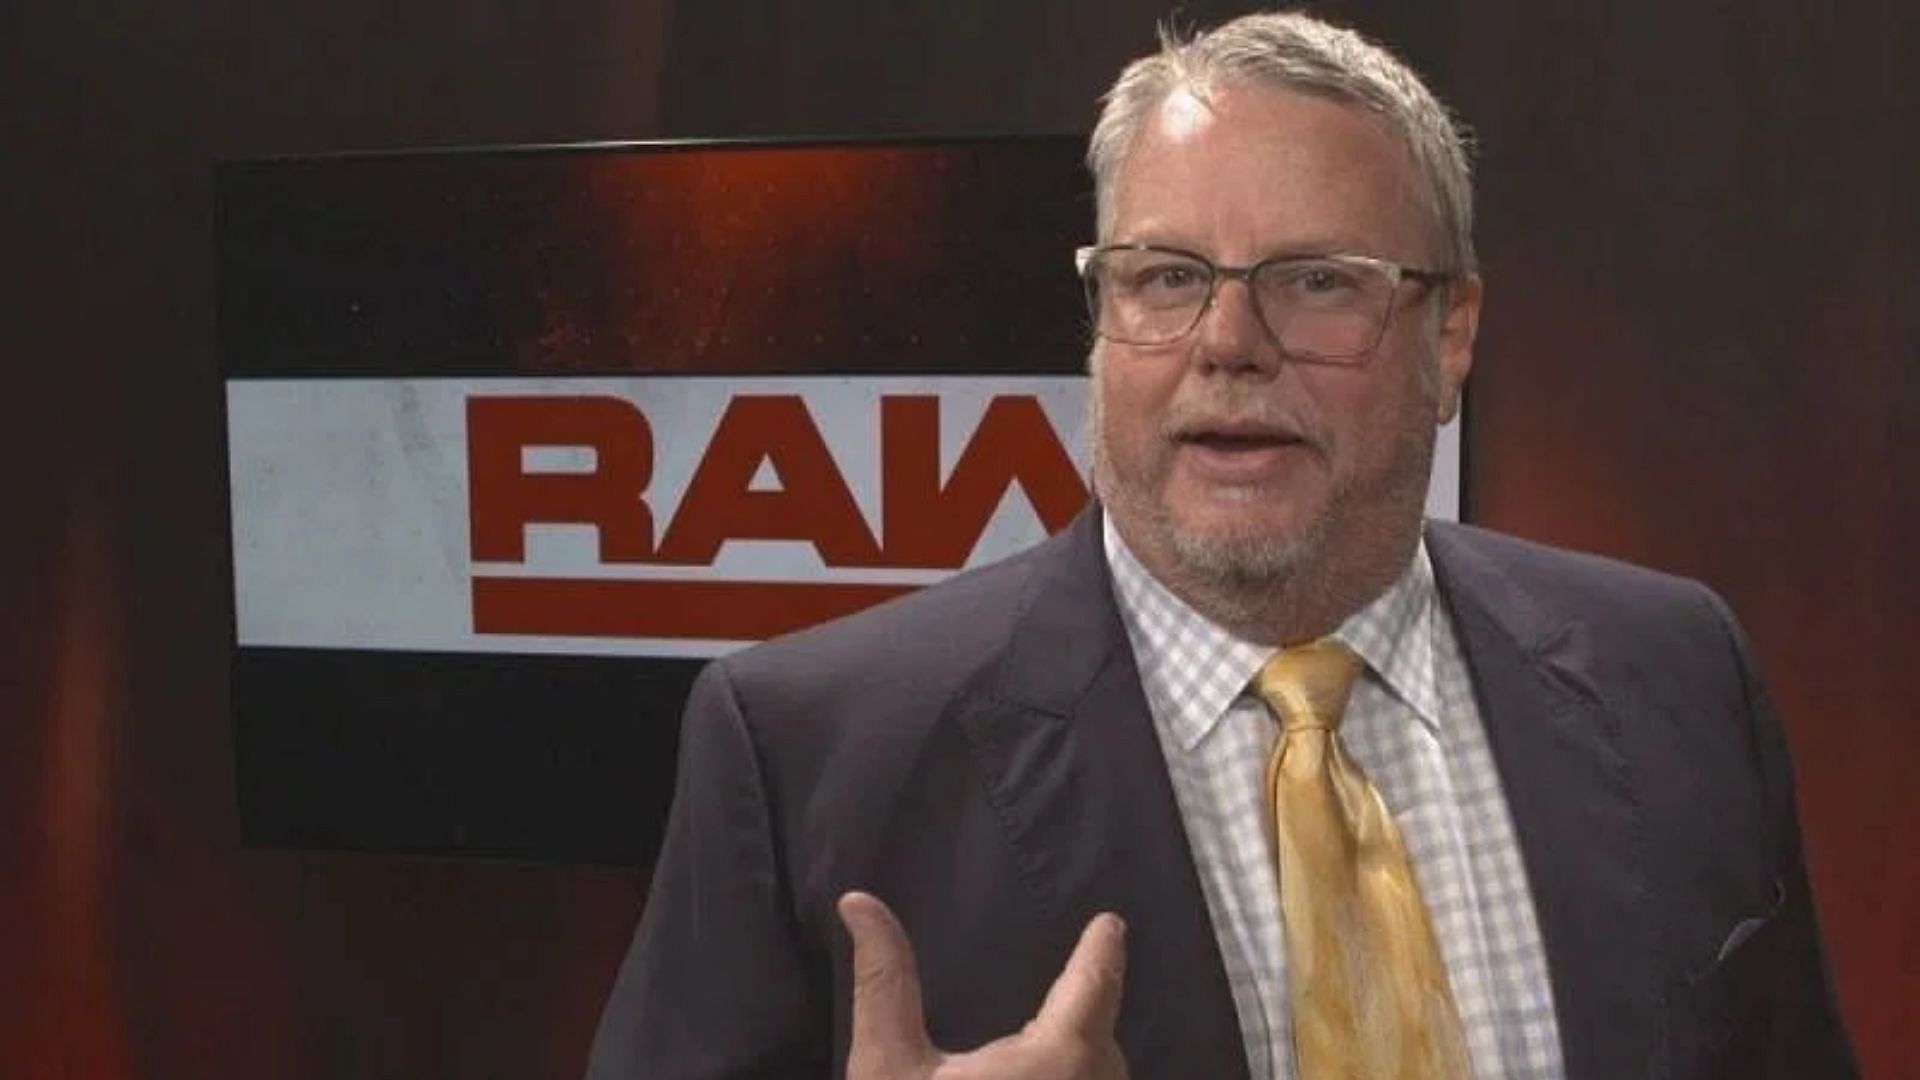 Bruce Prichard joined WWE in 1987